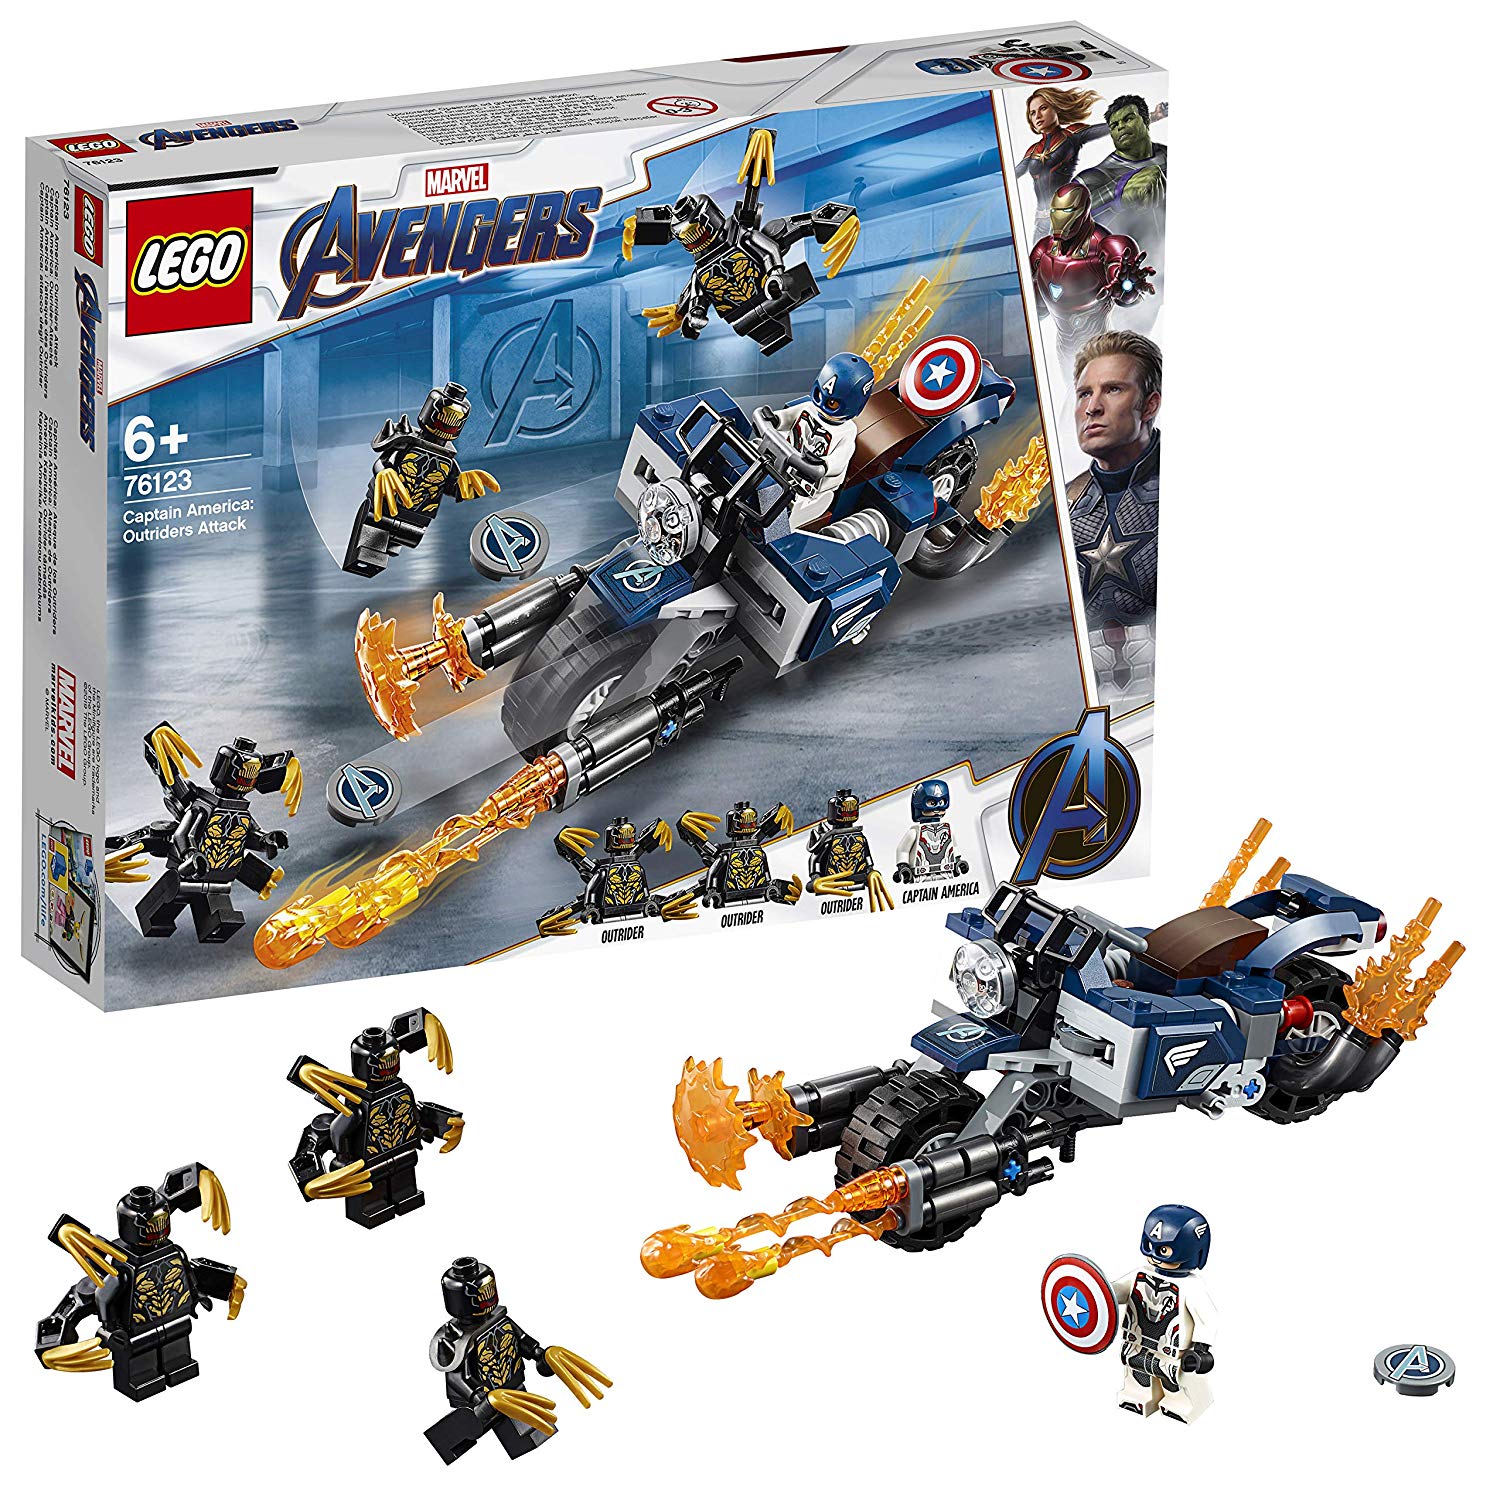 Lego 76123 Marvel Super Heroes Captain America: Outrider Attack